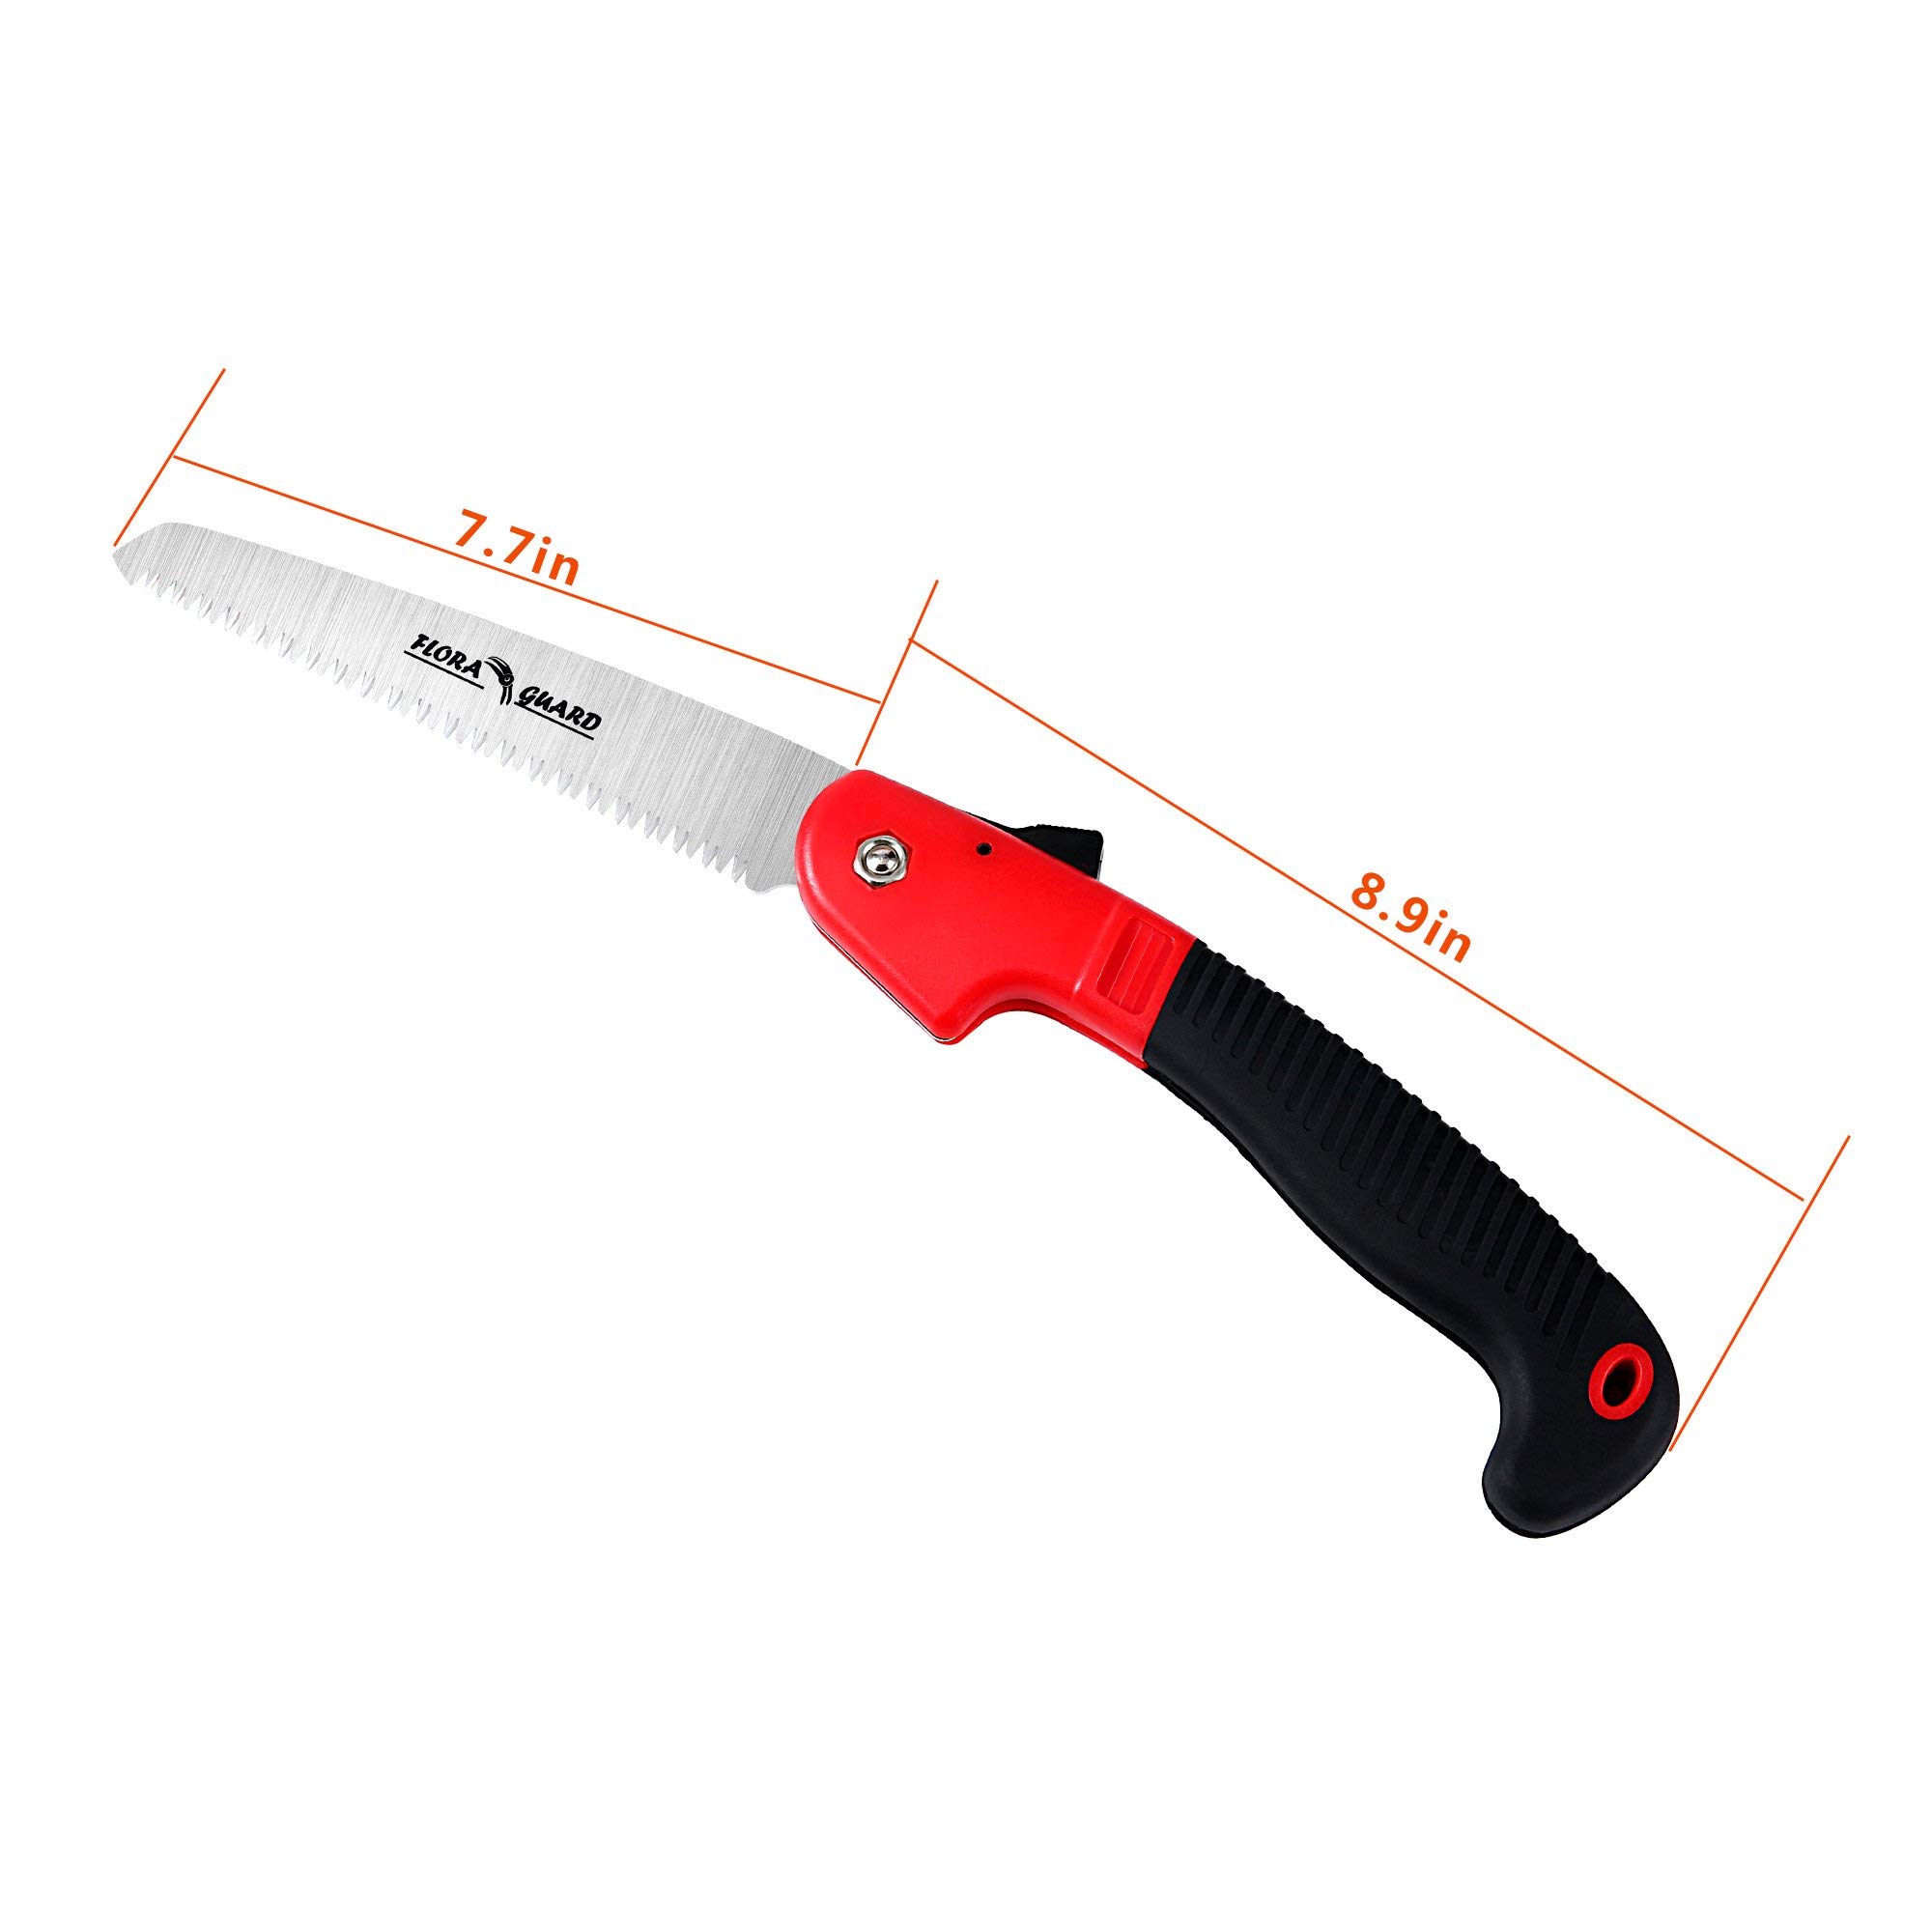 FLORA GUARD Folding Hand Saw, Camping/Pruning Saw with Rugged 7.7 Inch Blades Professional Folding Saw Razor Tooth Sharp Blade Solid Grip(Red)